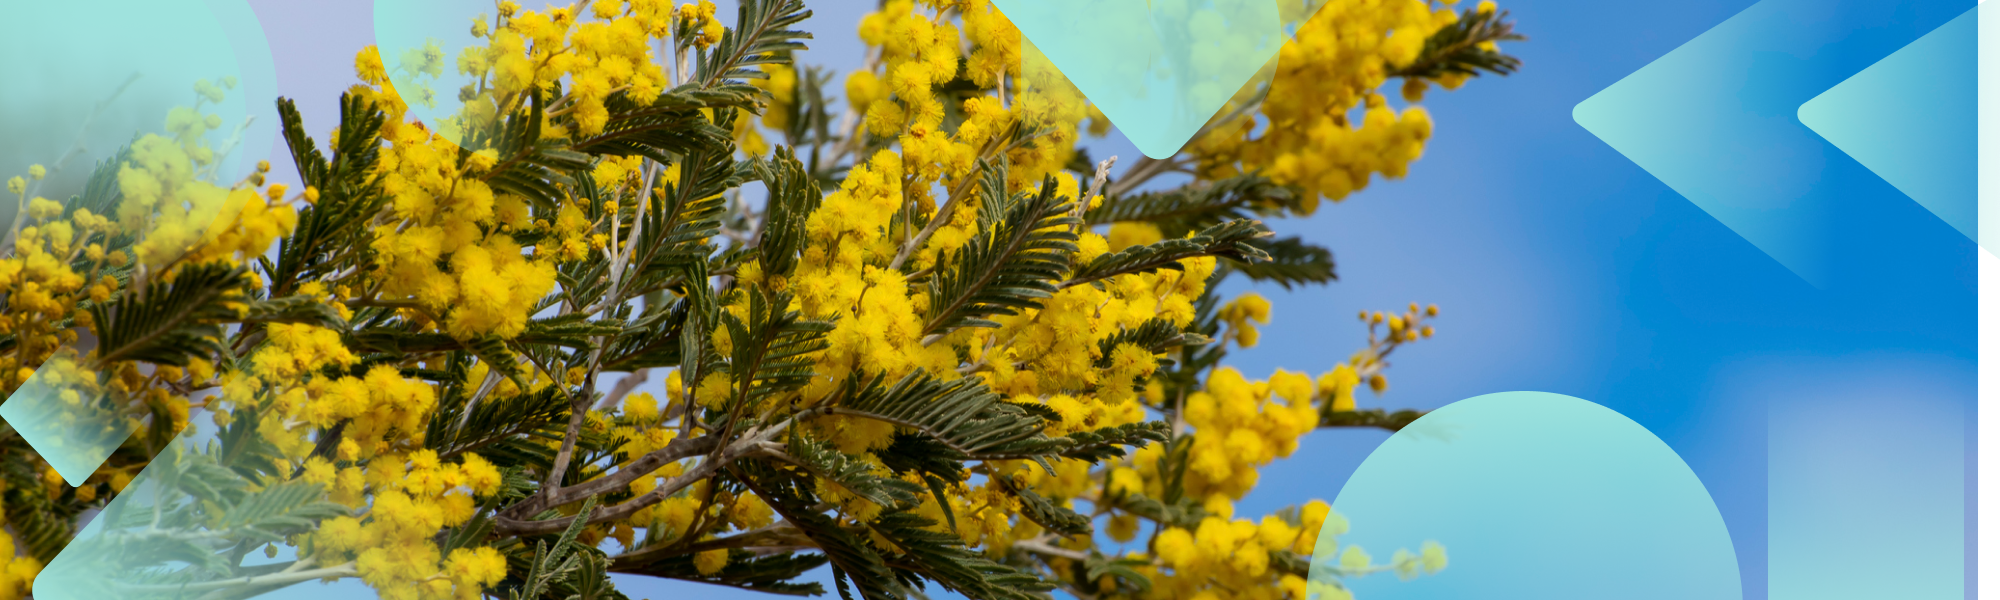 Image: Native wattle in the sunlight